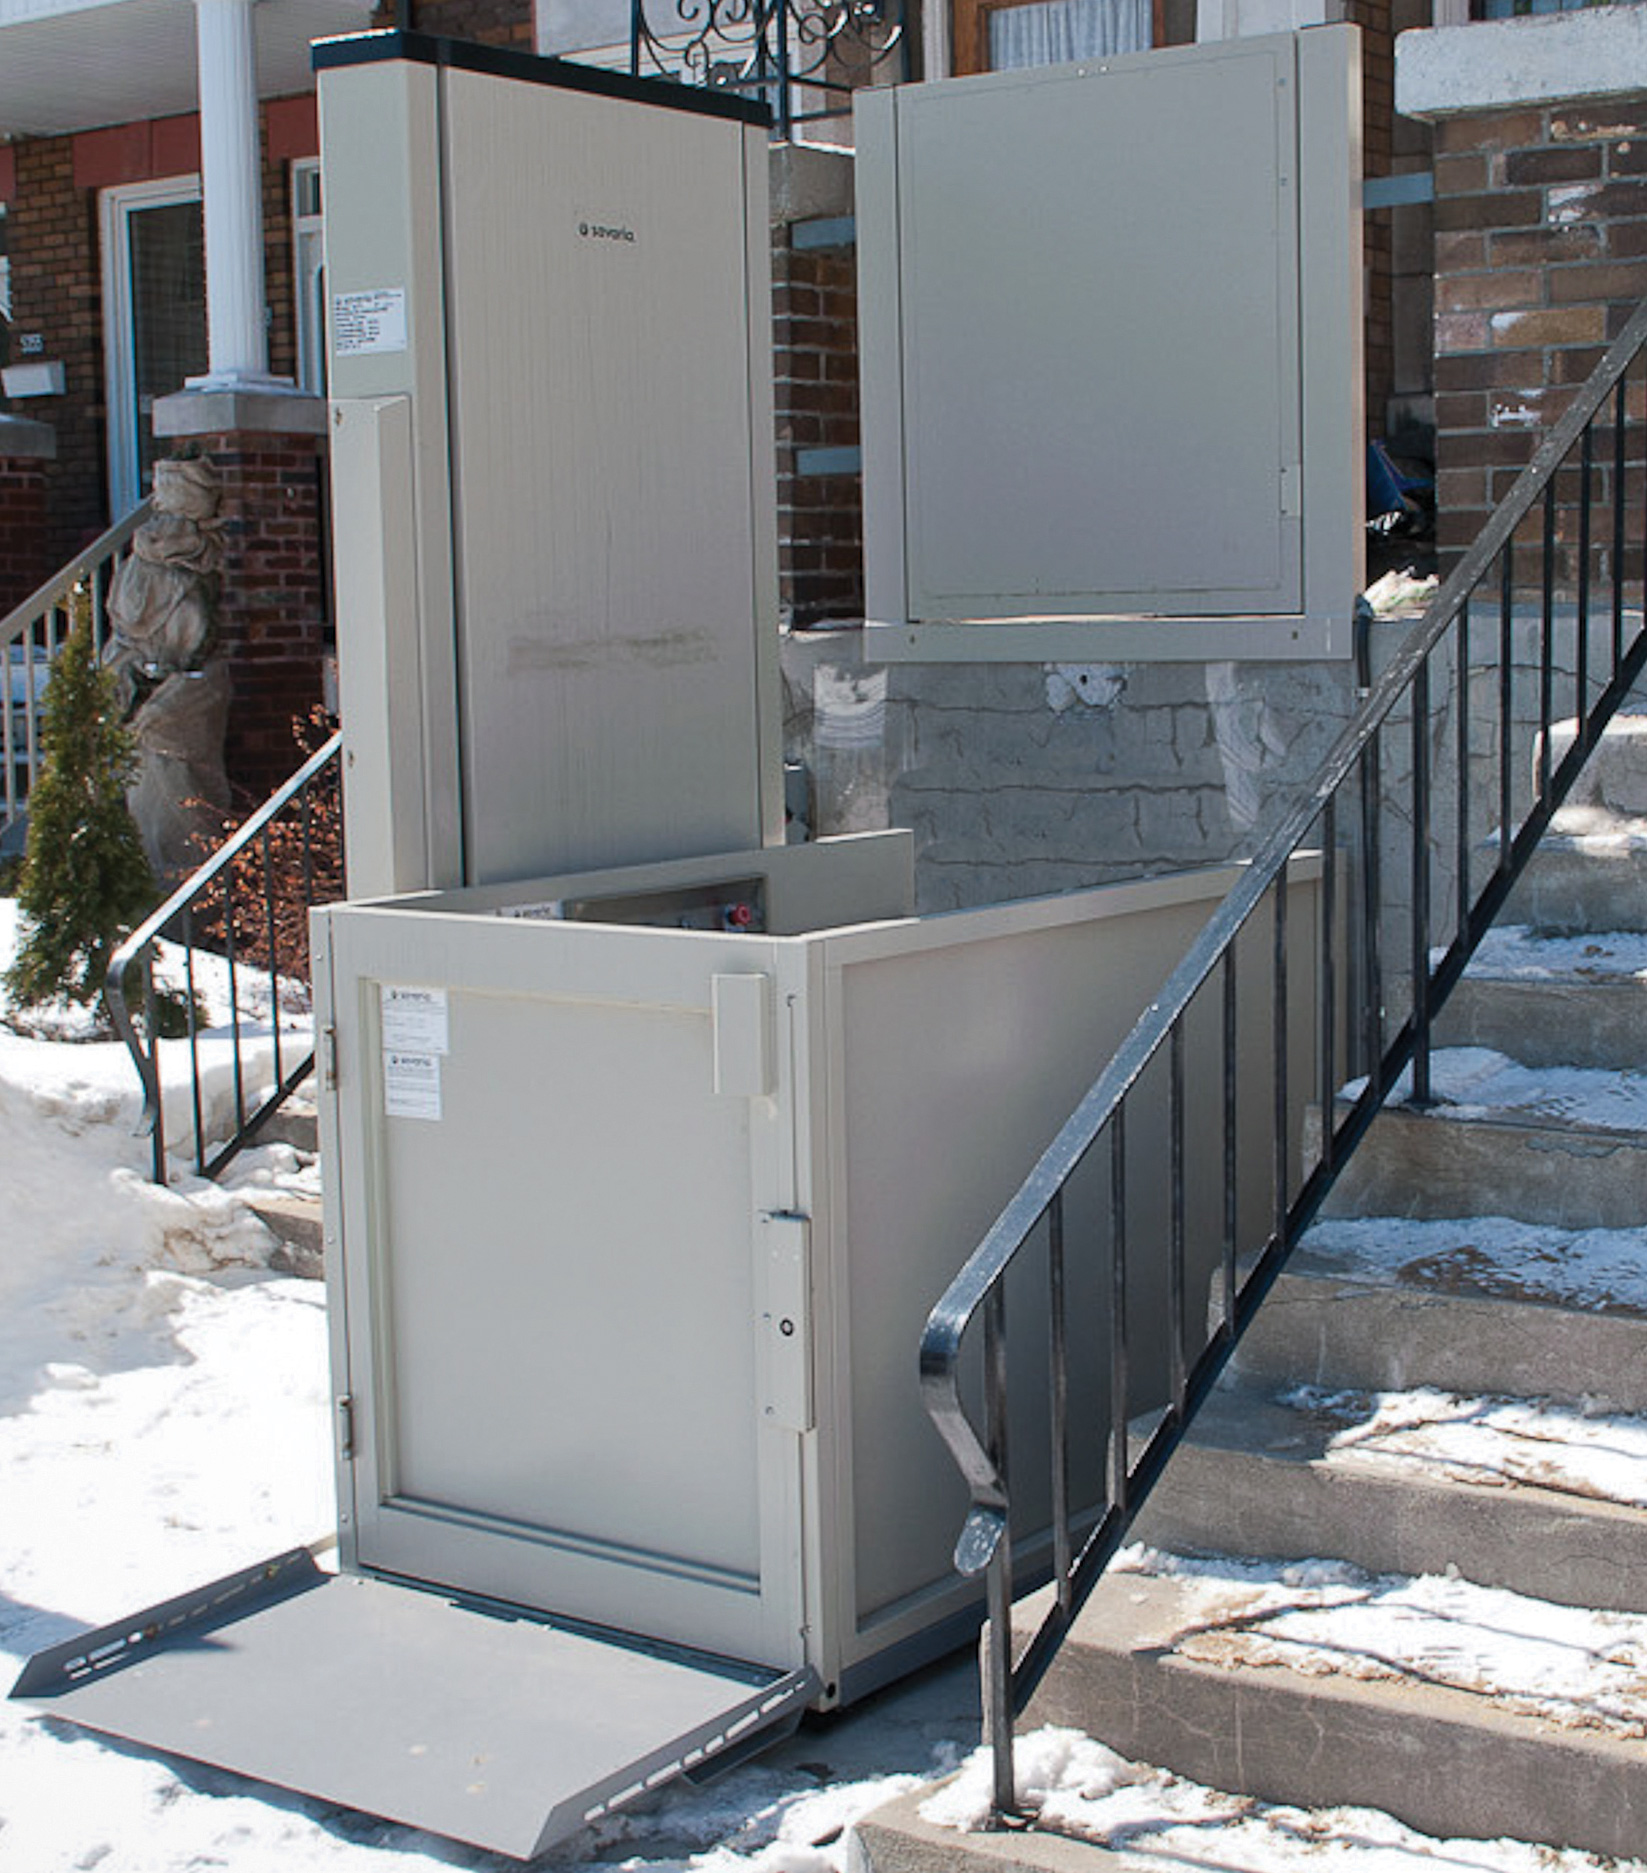 Wheelchair lift features, folding access ramp and lower landing gate